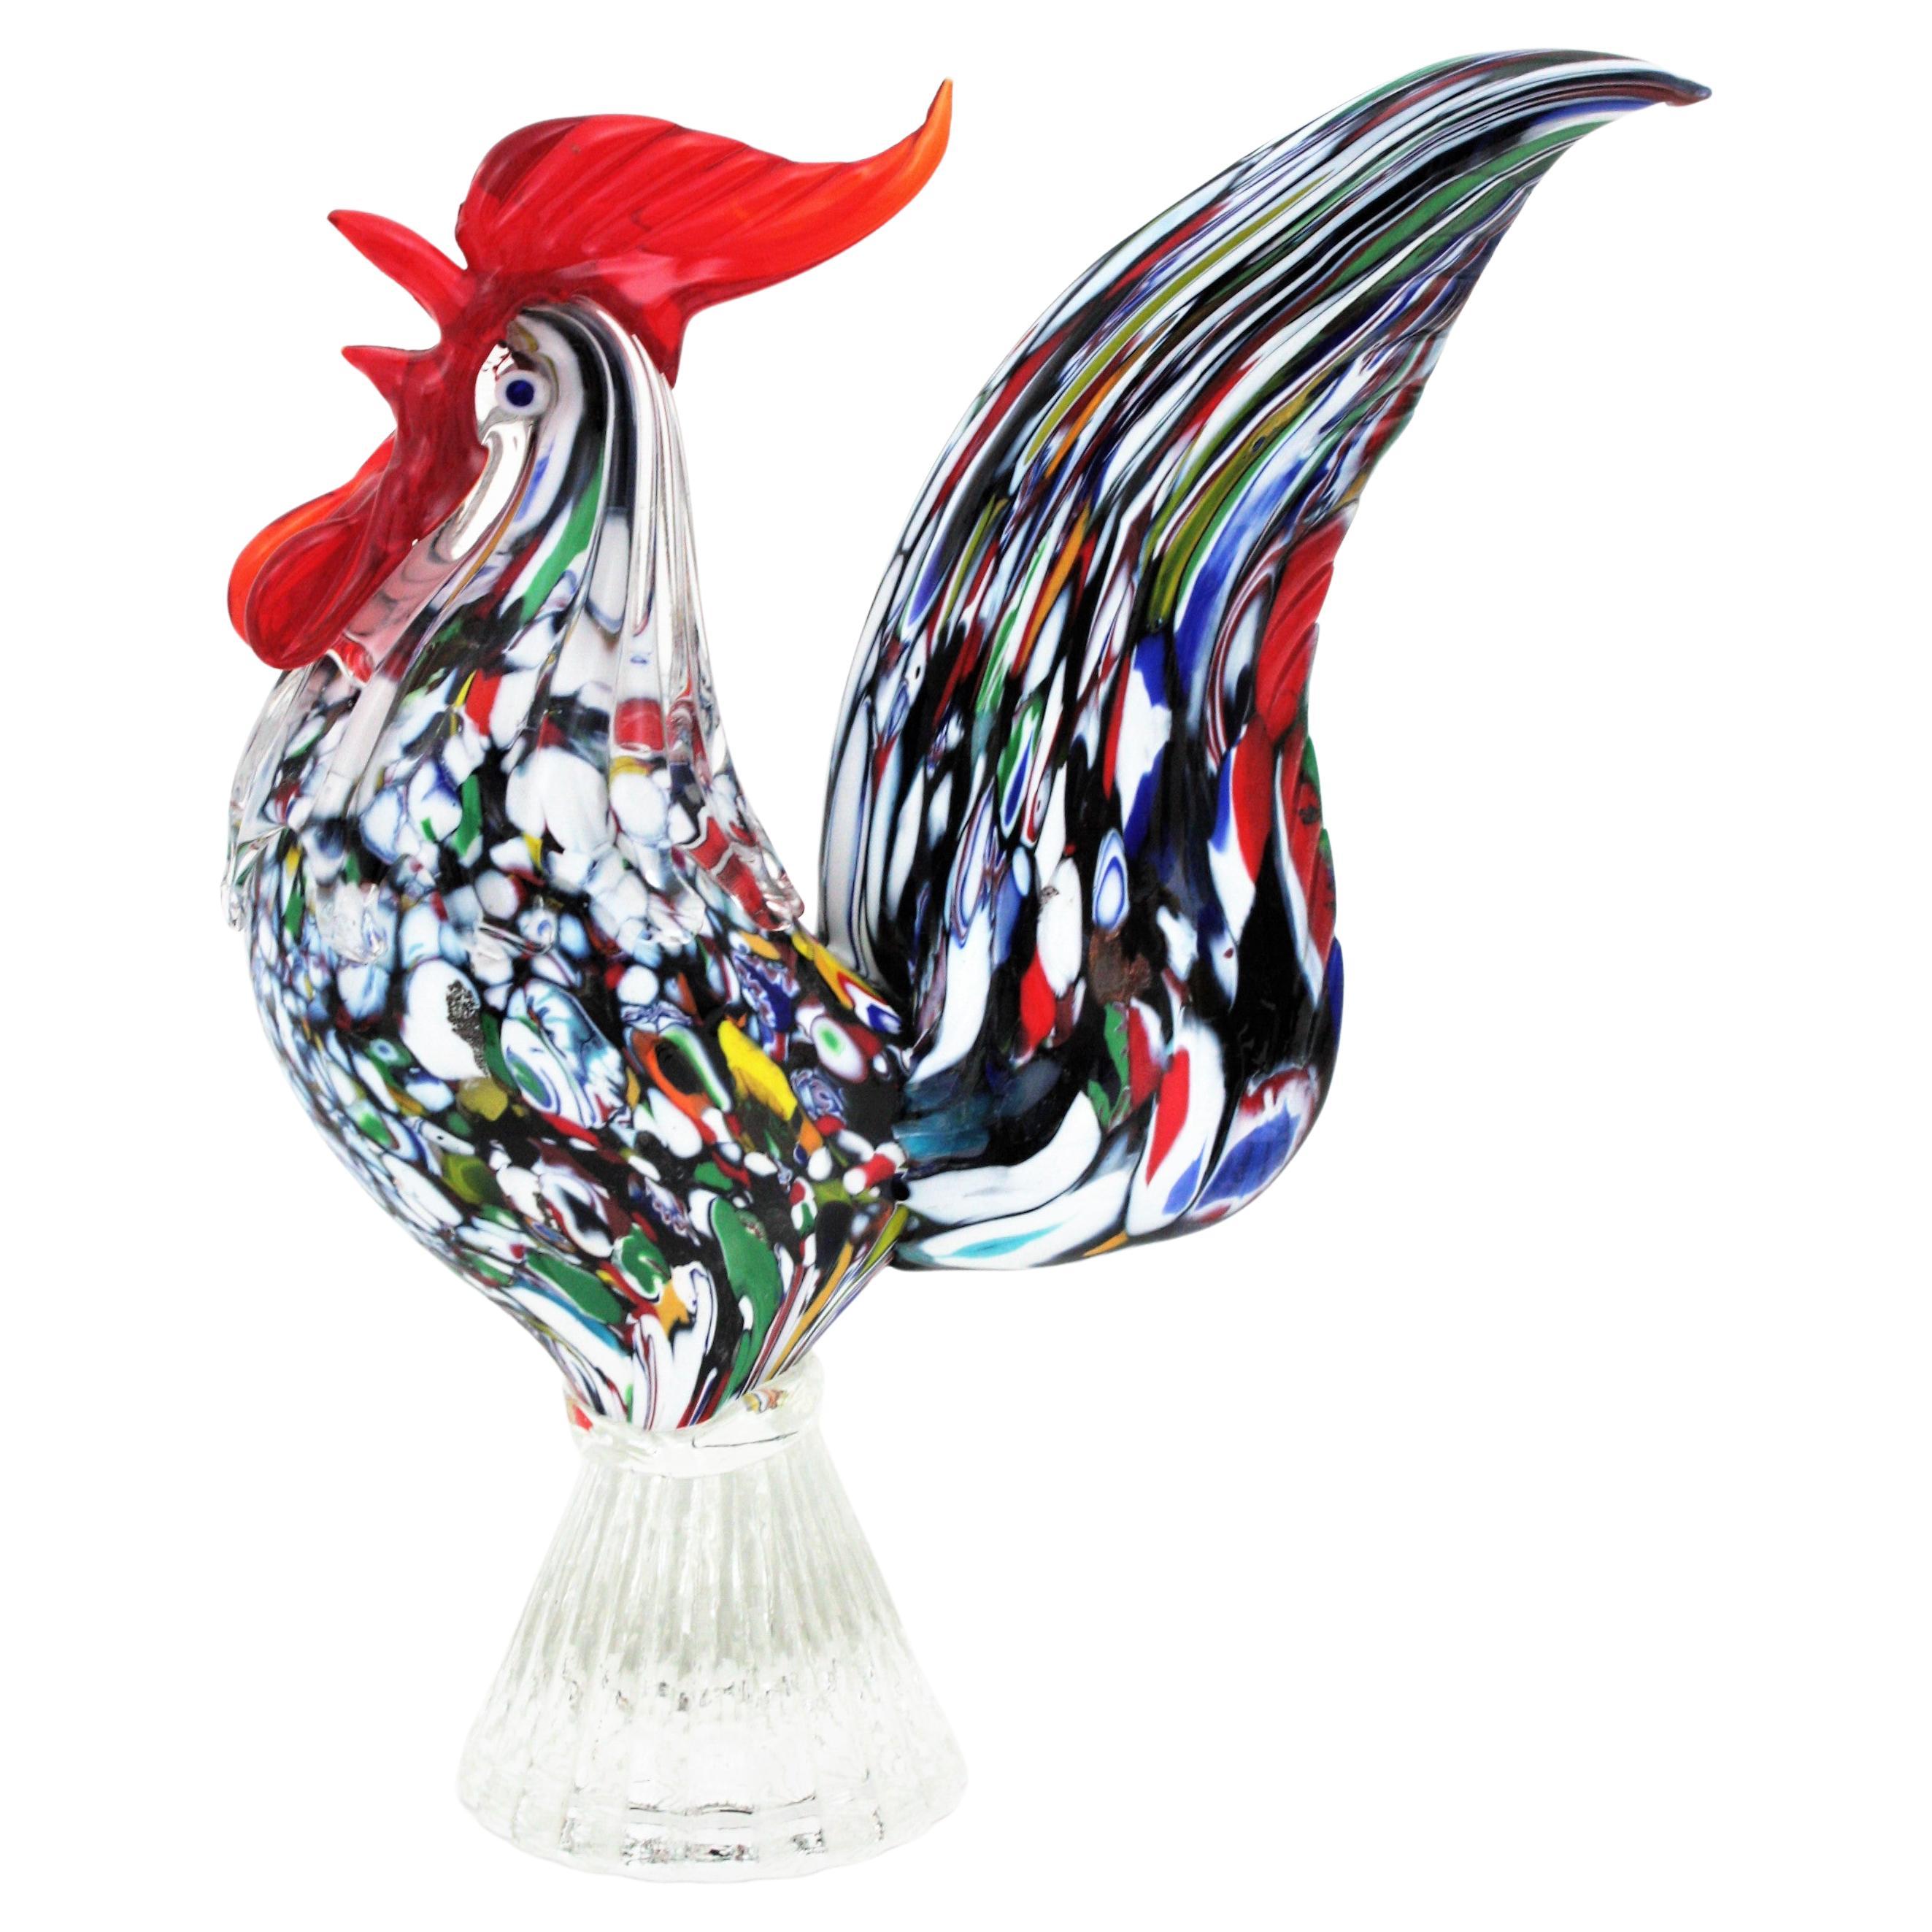 Toso Murano Multicolor Murrine Art Glass Rooster Sculpture or Paperweight.